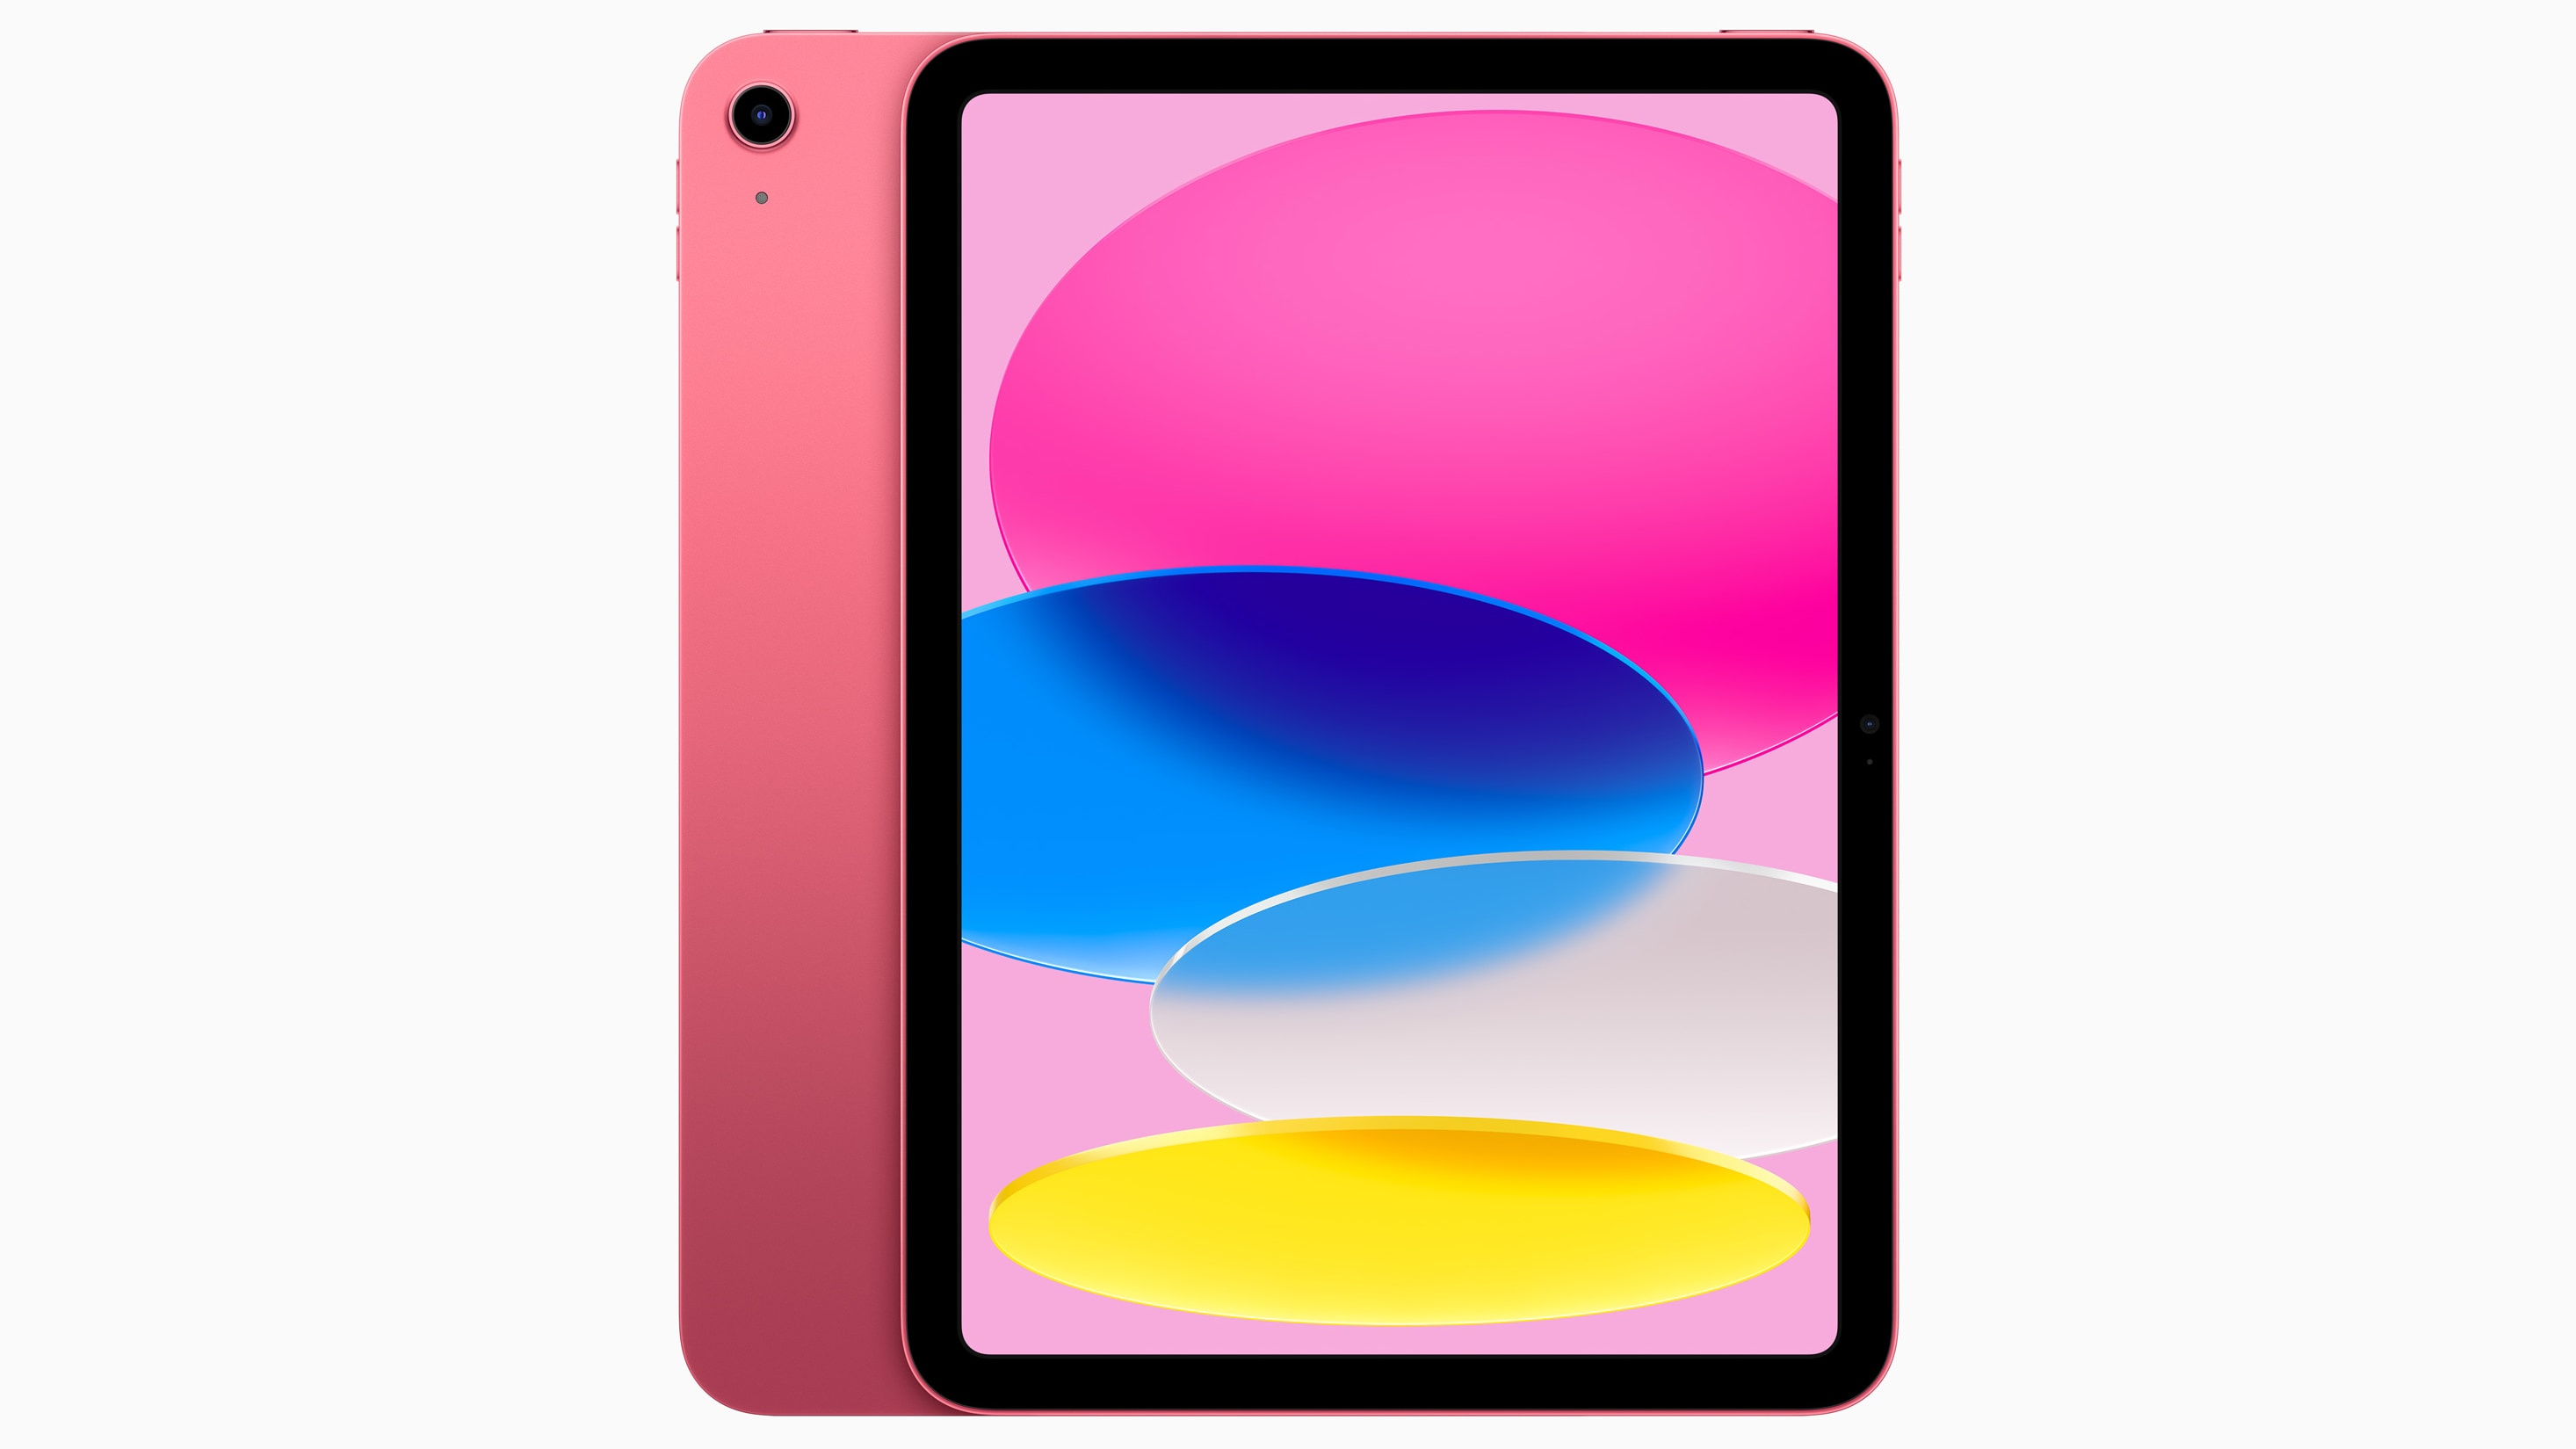 The tenth-generation iPad in pink